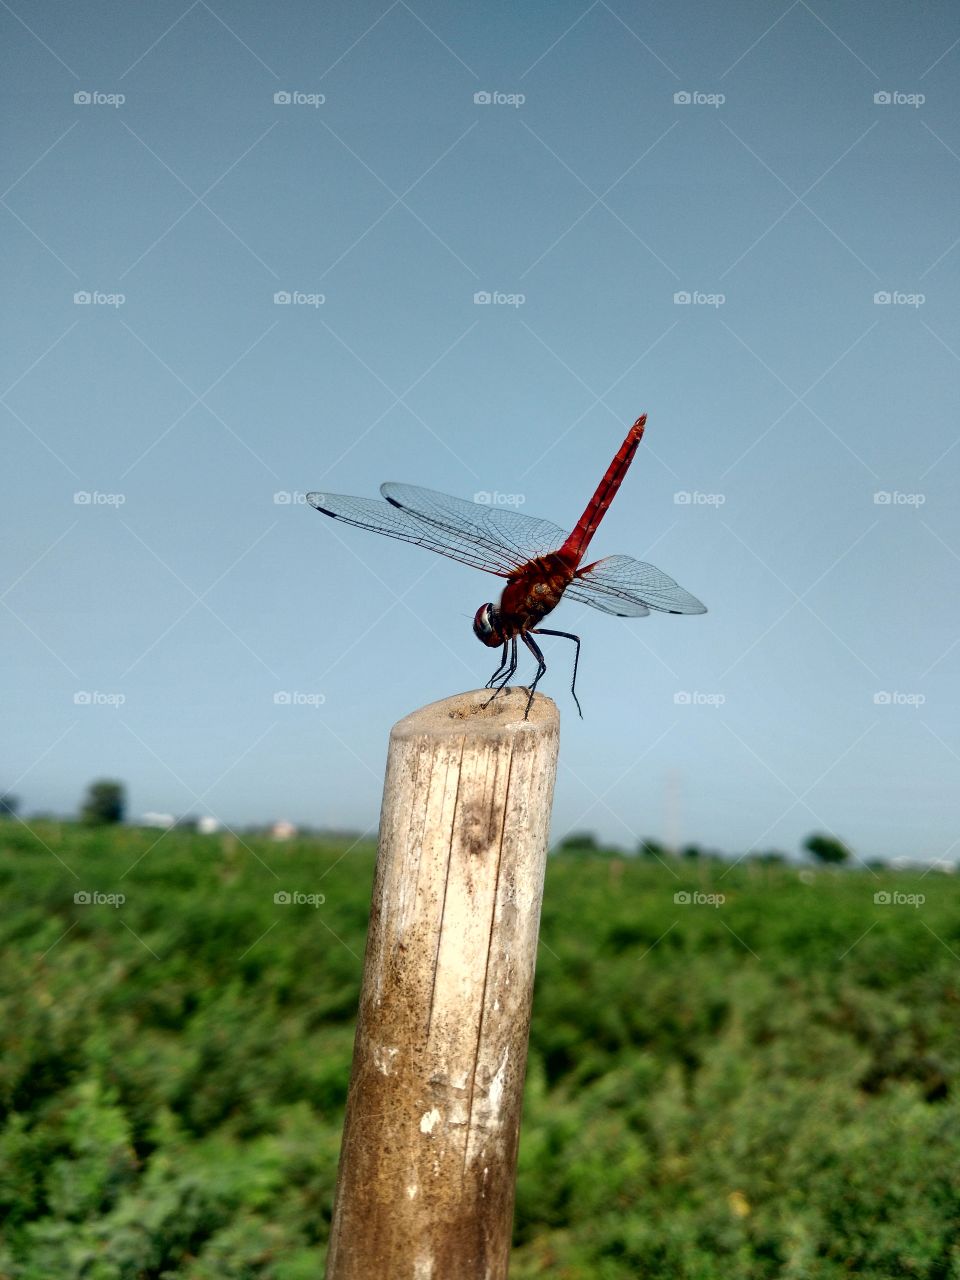 Dragonfly Sitting on the bamboo stick on the farm.